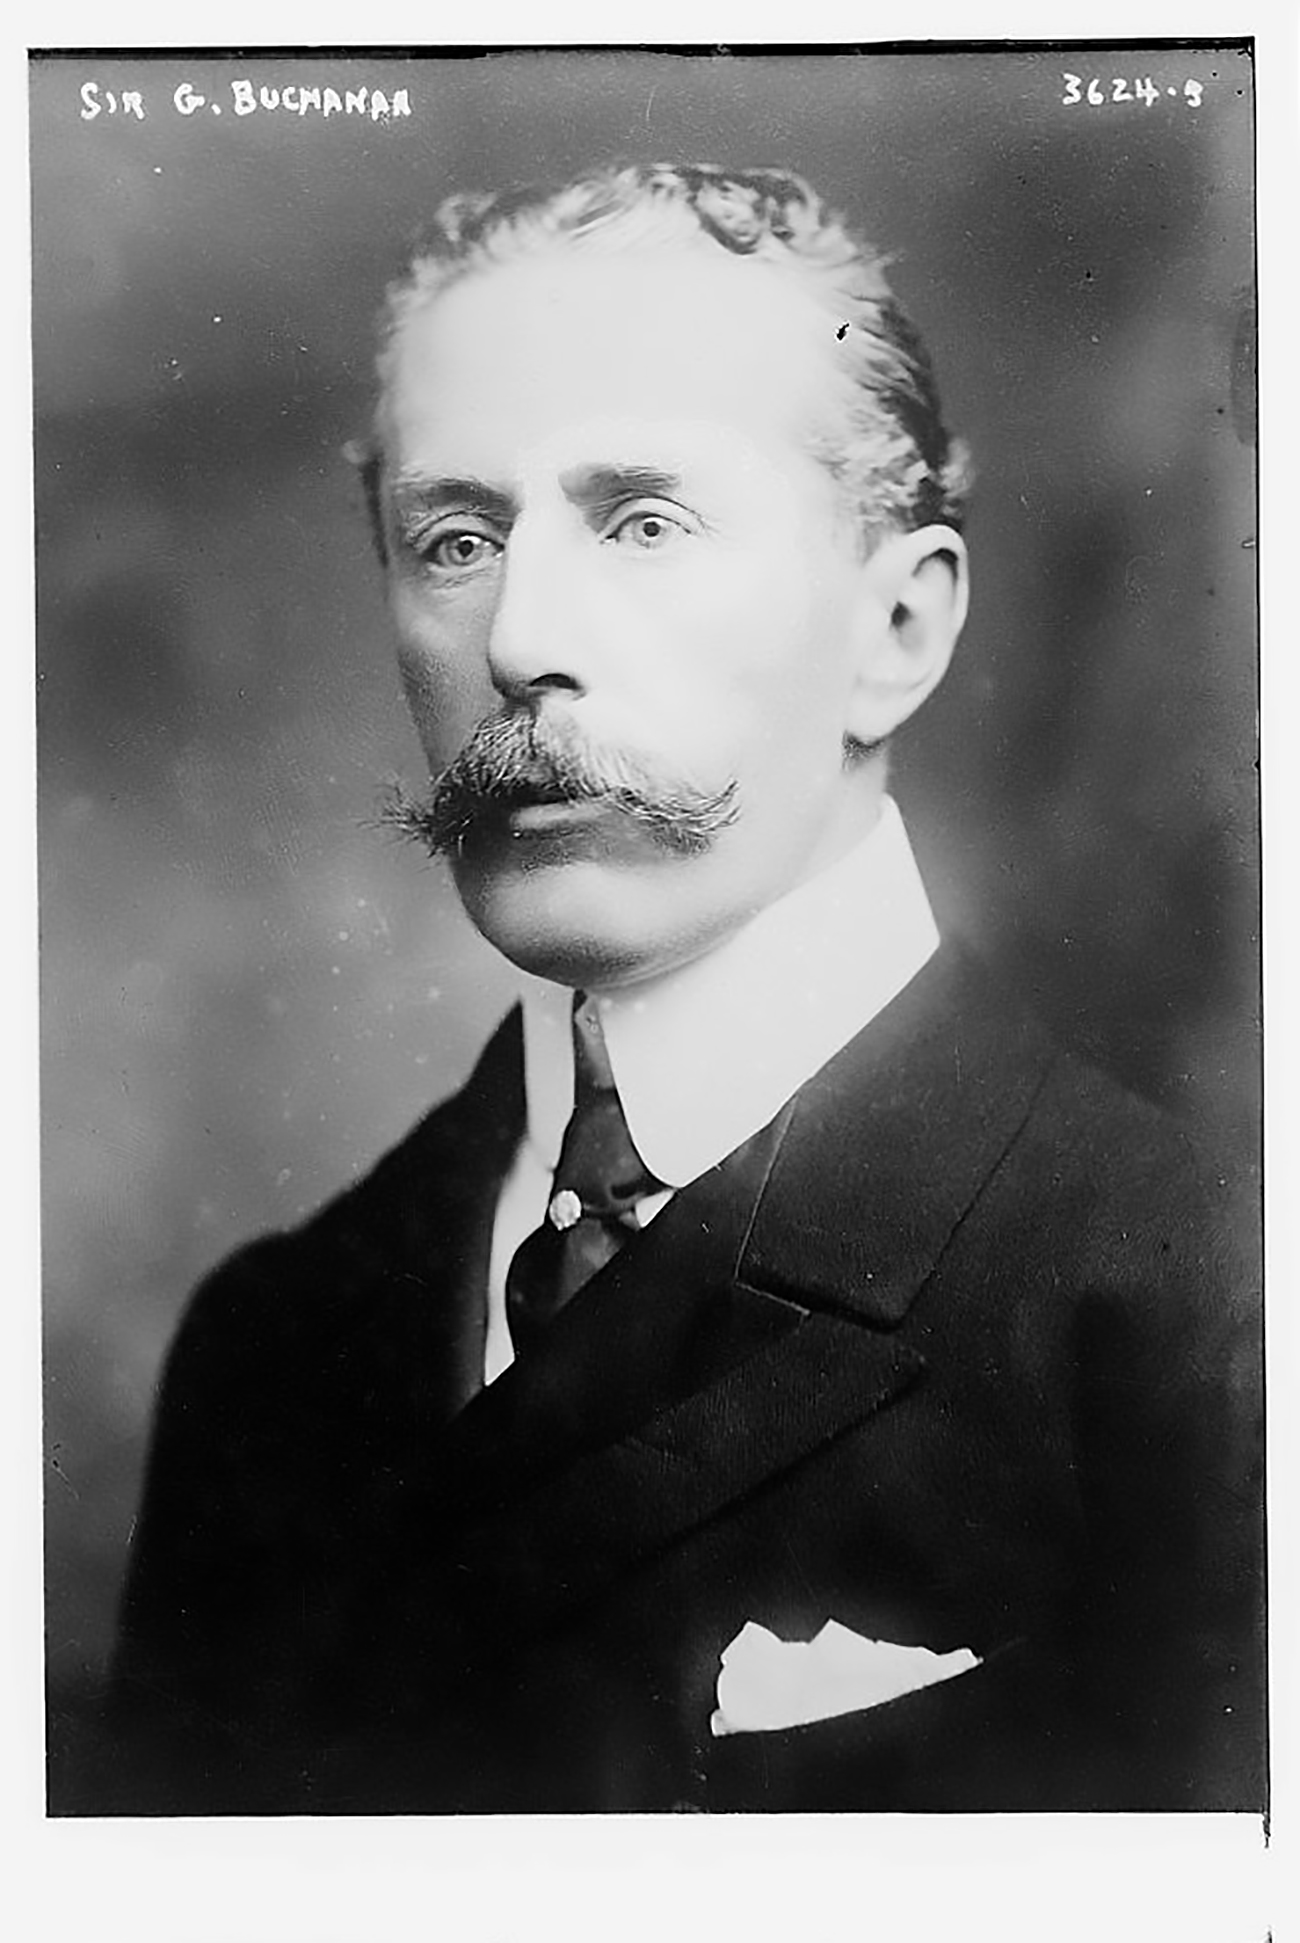 Sir George William Buchanan in 1915. / Photo: Library of Congress